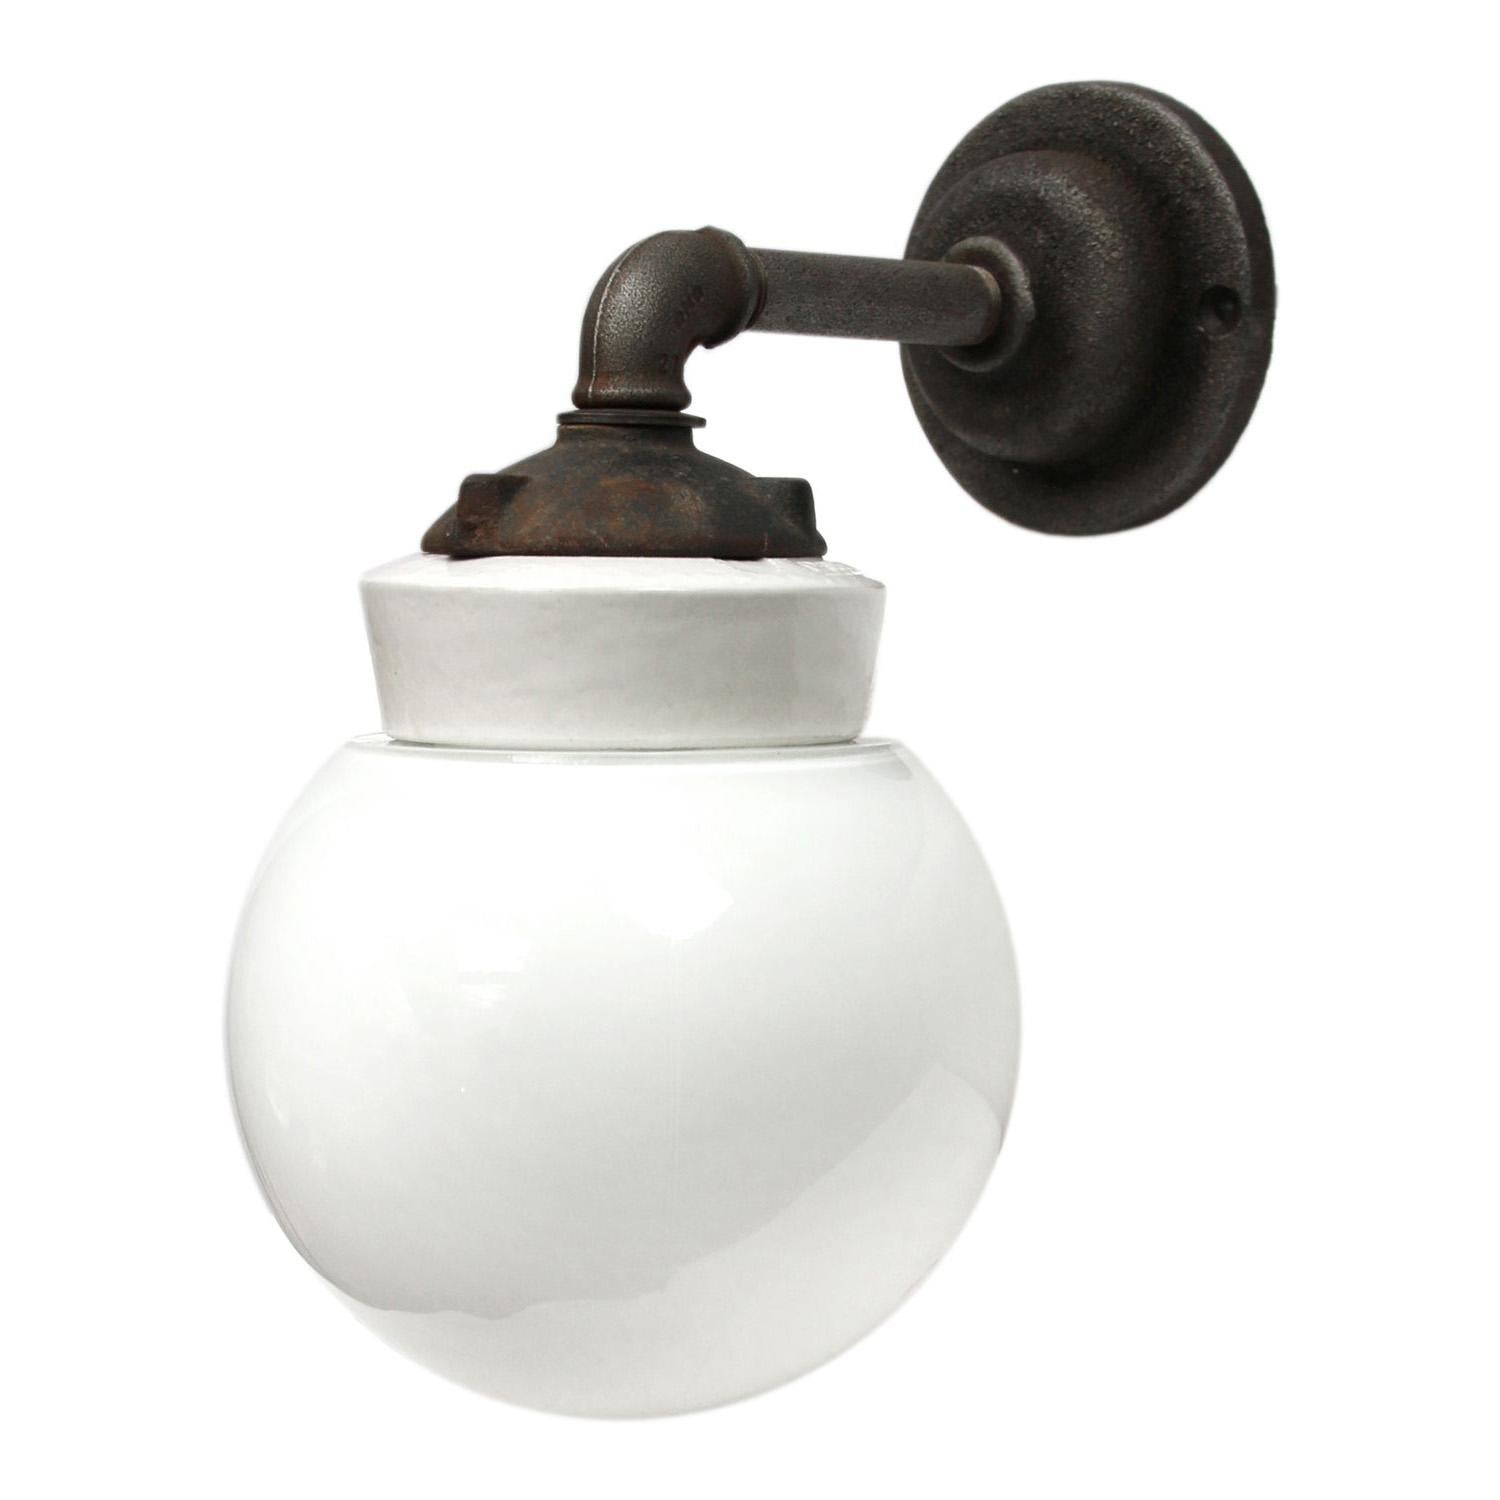 Porcelain industrial wall lamp.
White porcelain, cast iron and white opaline glass.
2 conductors, no ground.

Diameter cast iron wall piece 10.5 cm / 4”.
2 holes to secure.

For use inside only

Weight: 2.05 kg / 4.5 lb

Priced per individual item.